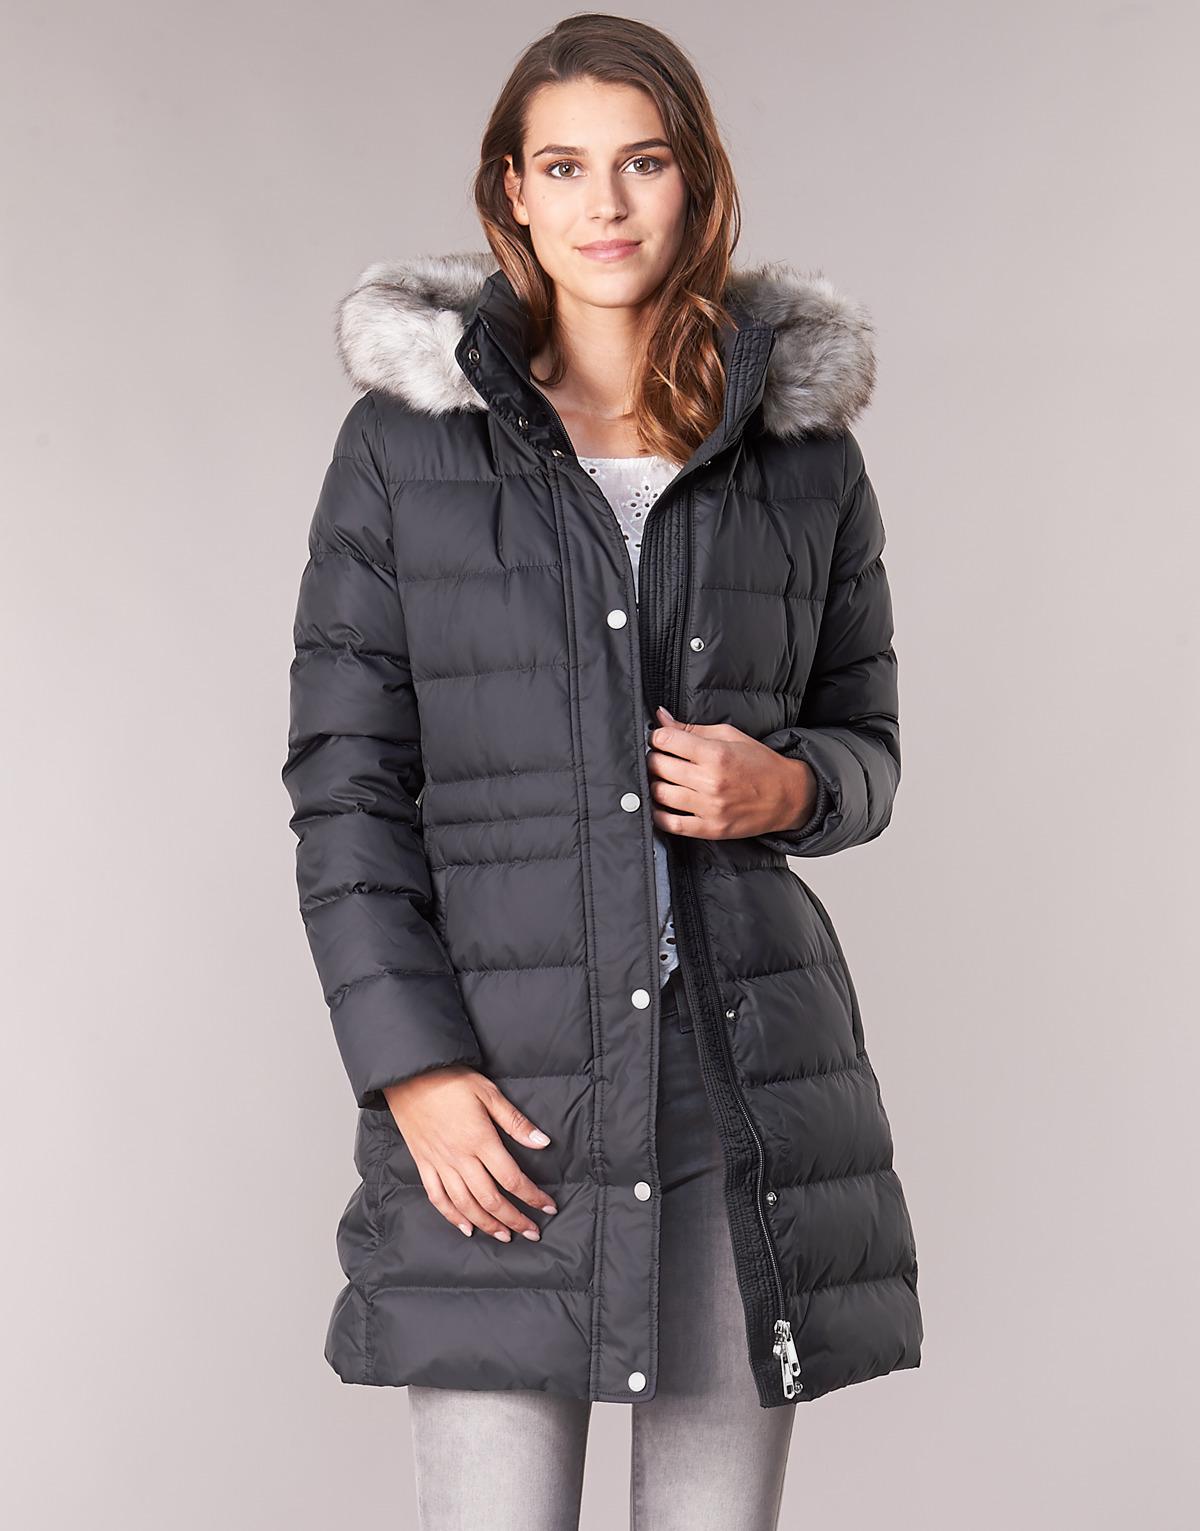 Tommy Hilfiger New Tyra Down Jacket in Black - Lyst